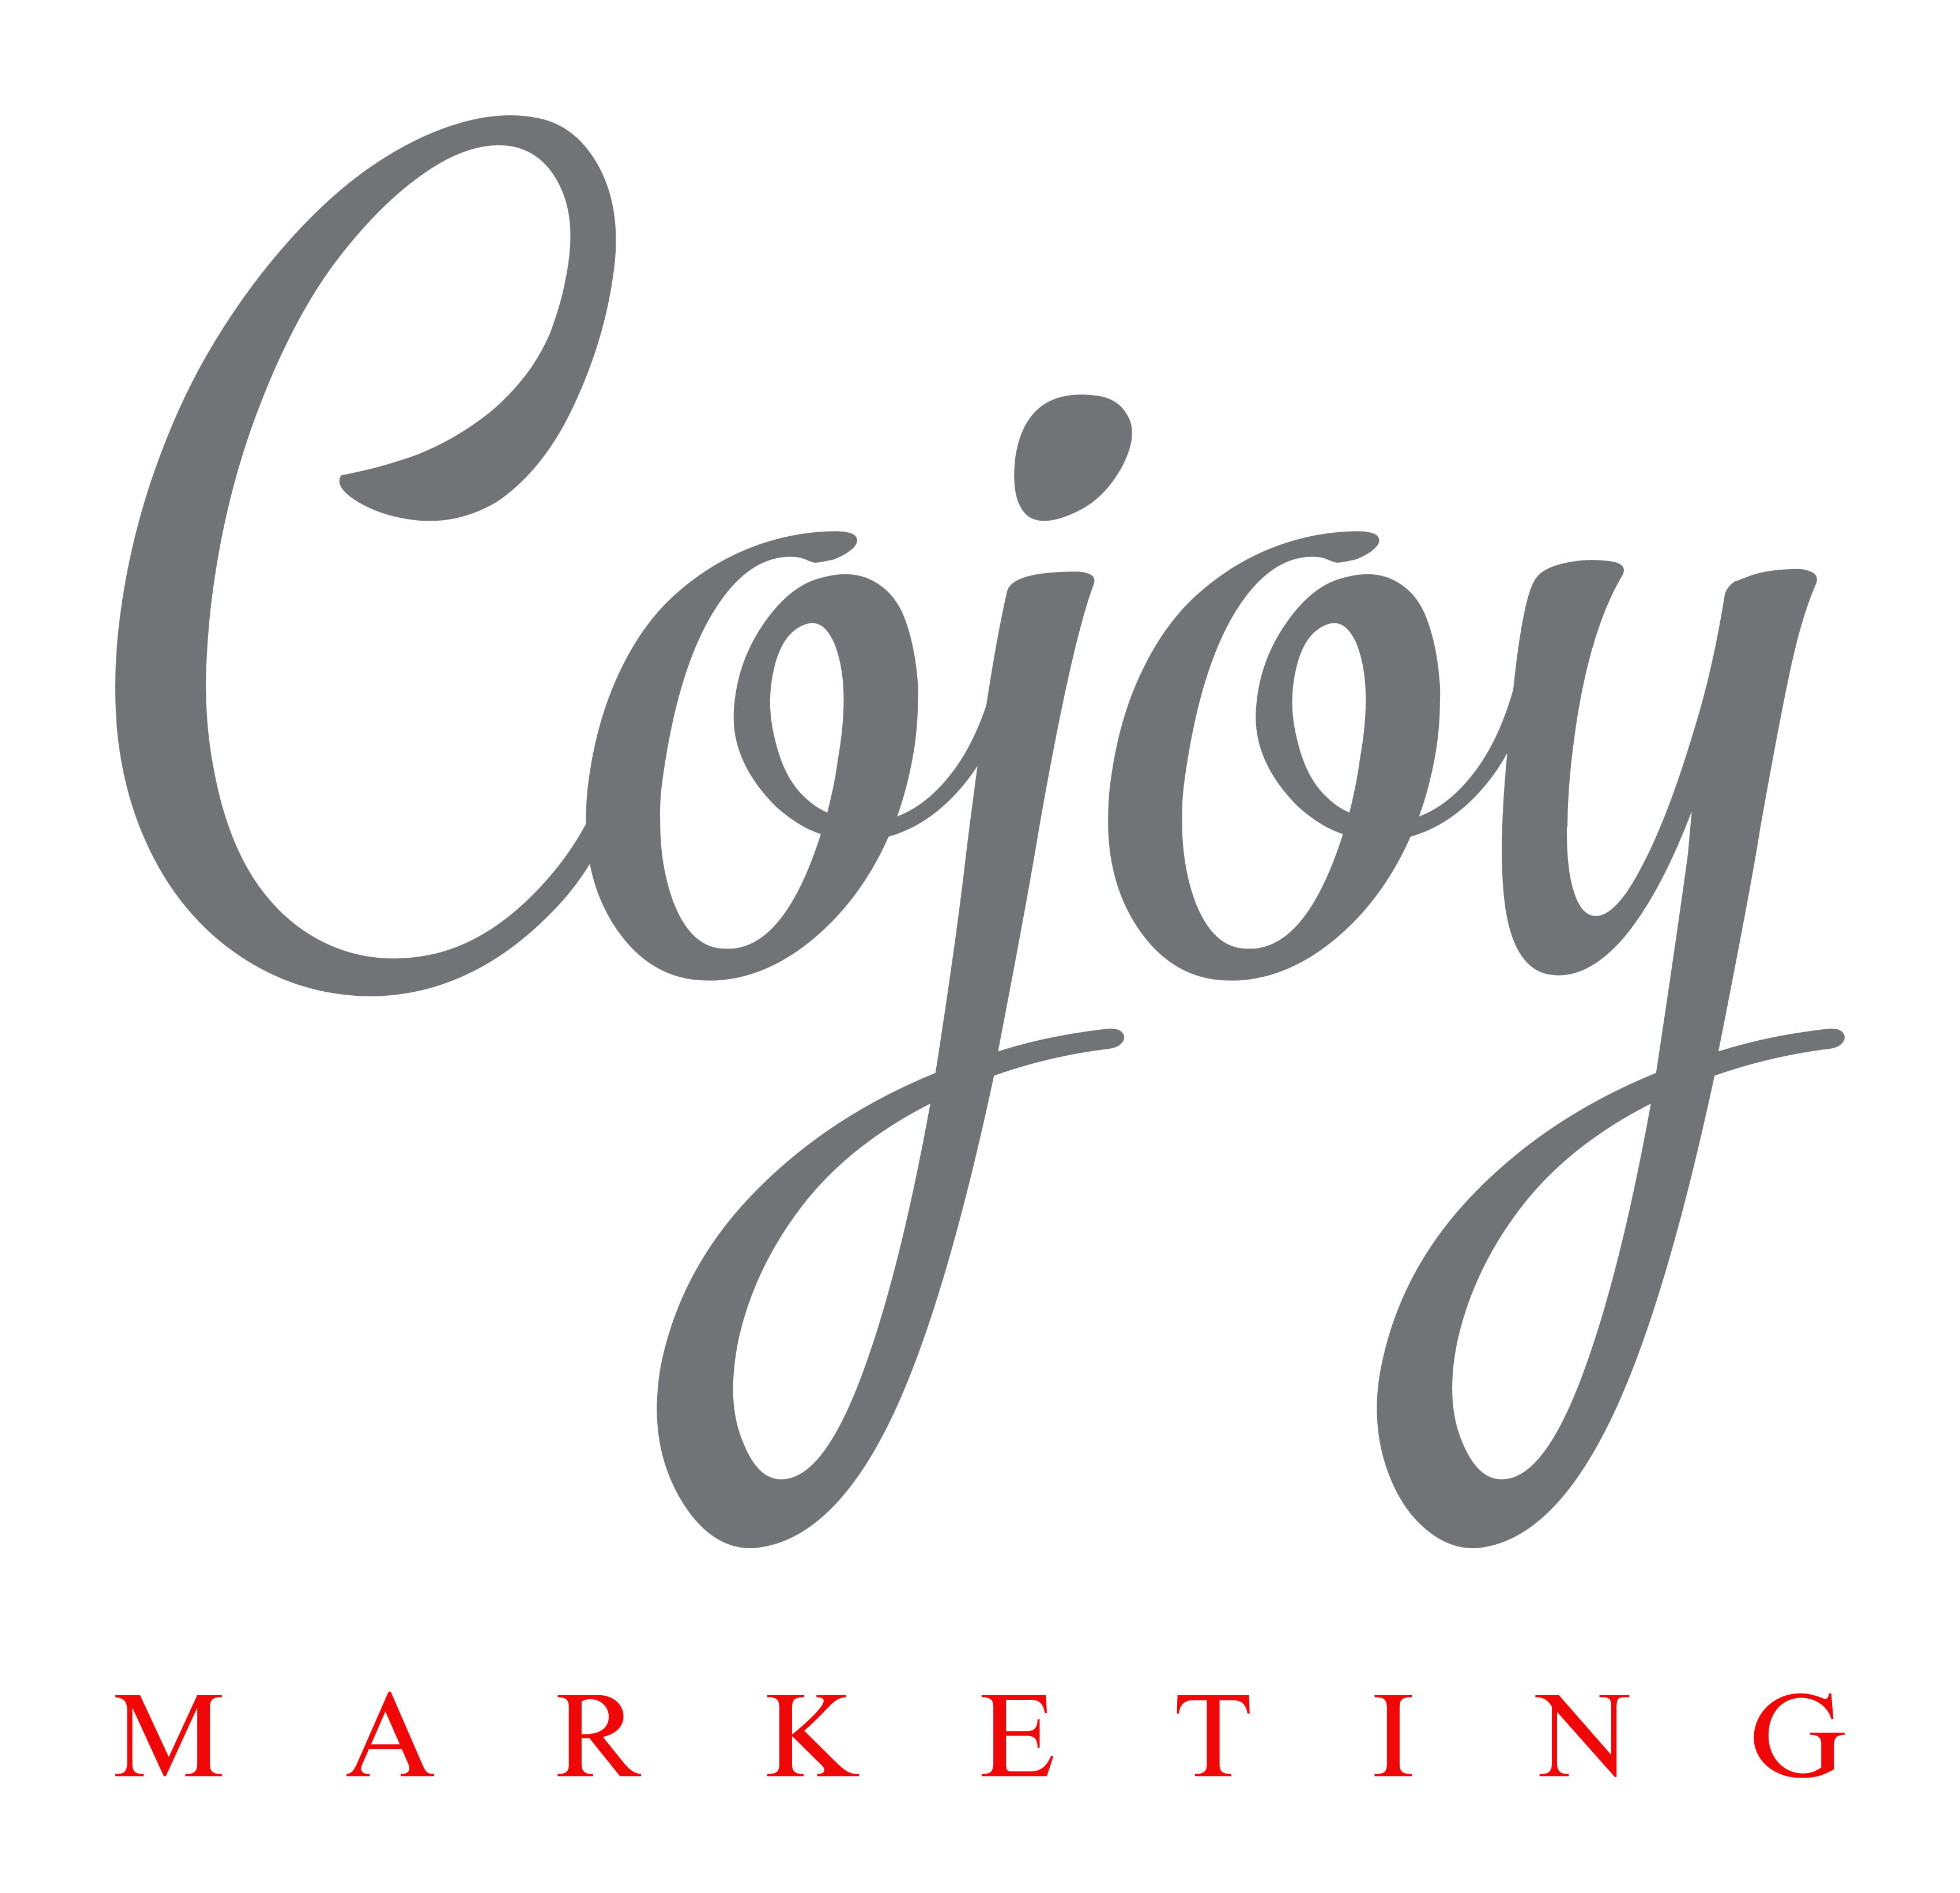 Graphic that reads Cojoy Marketing.